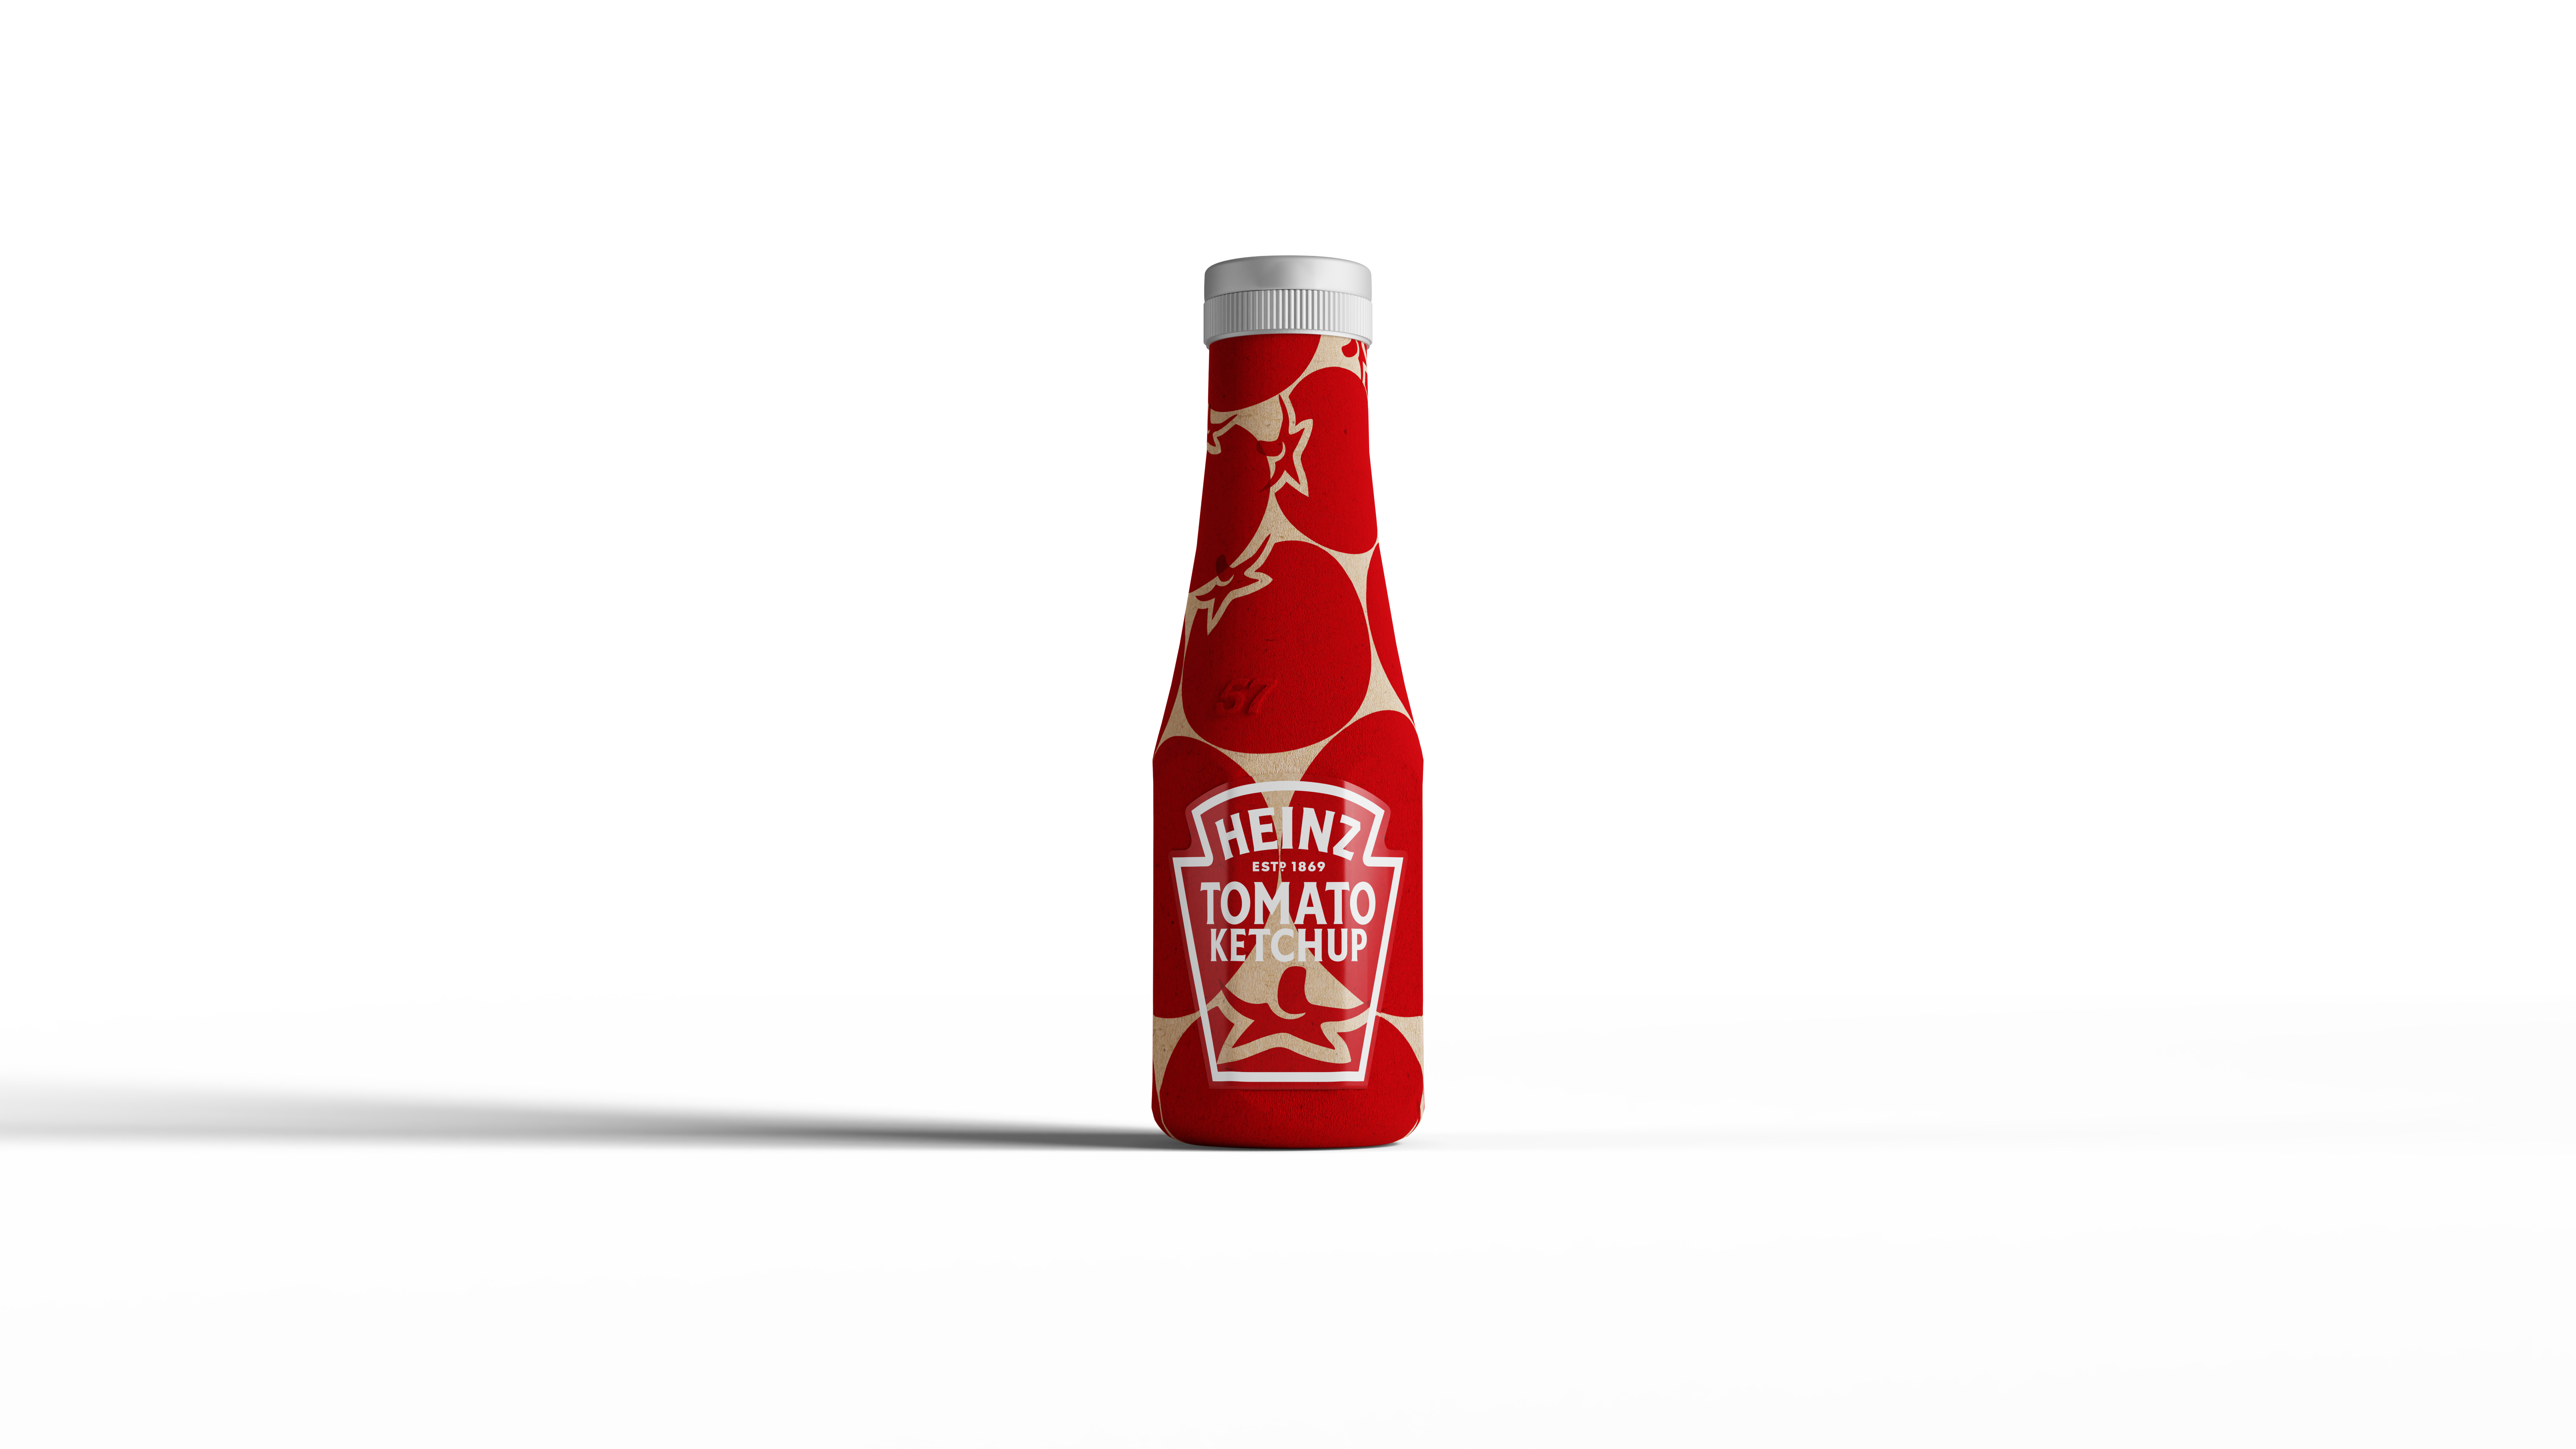 An inventor of the Heinz plastic ketchup bottle is waging war on